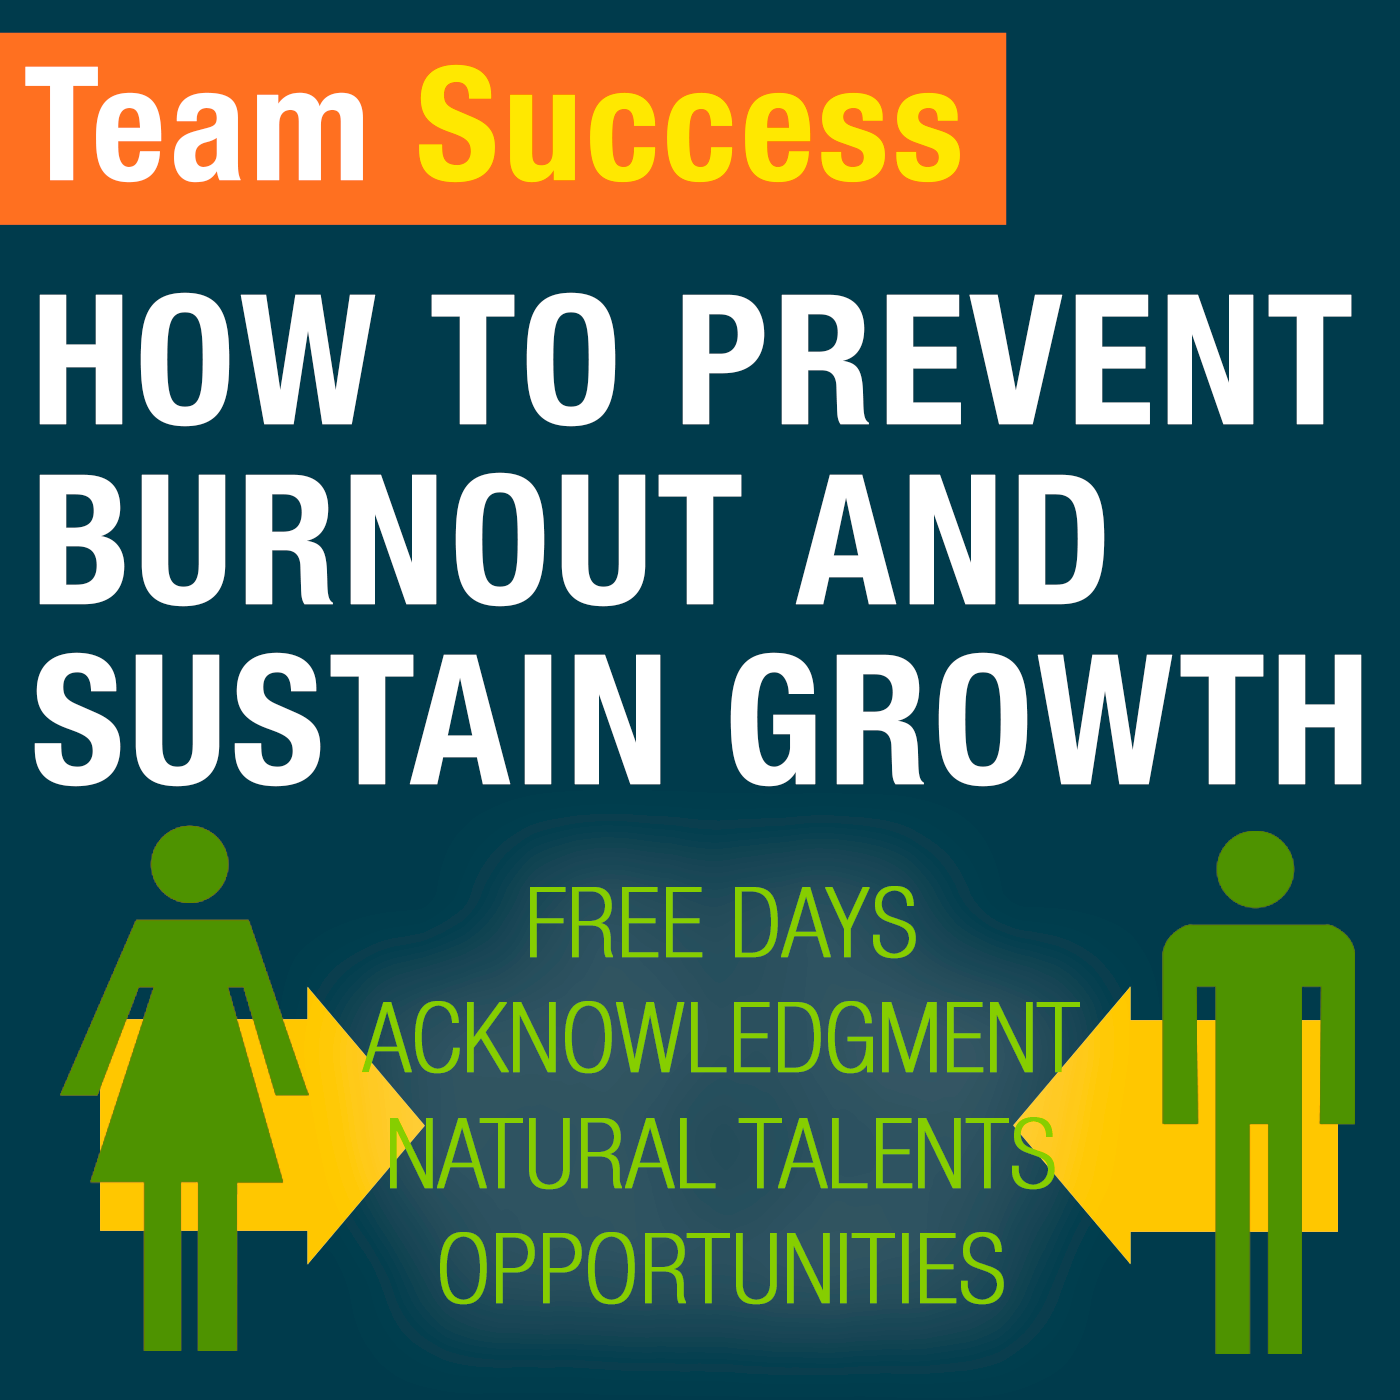 How To Prevent Burnout And Sustain Growth